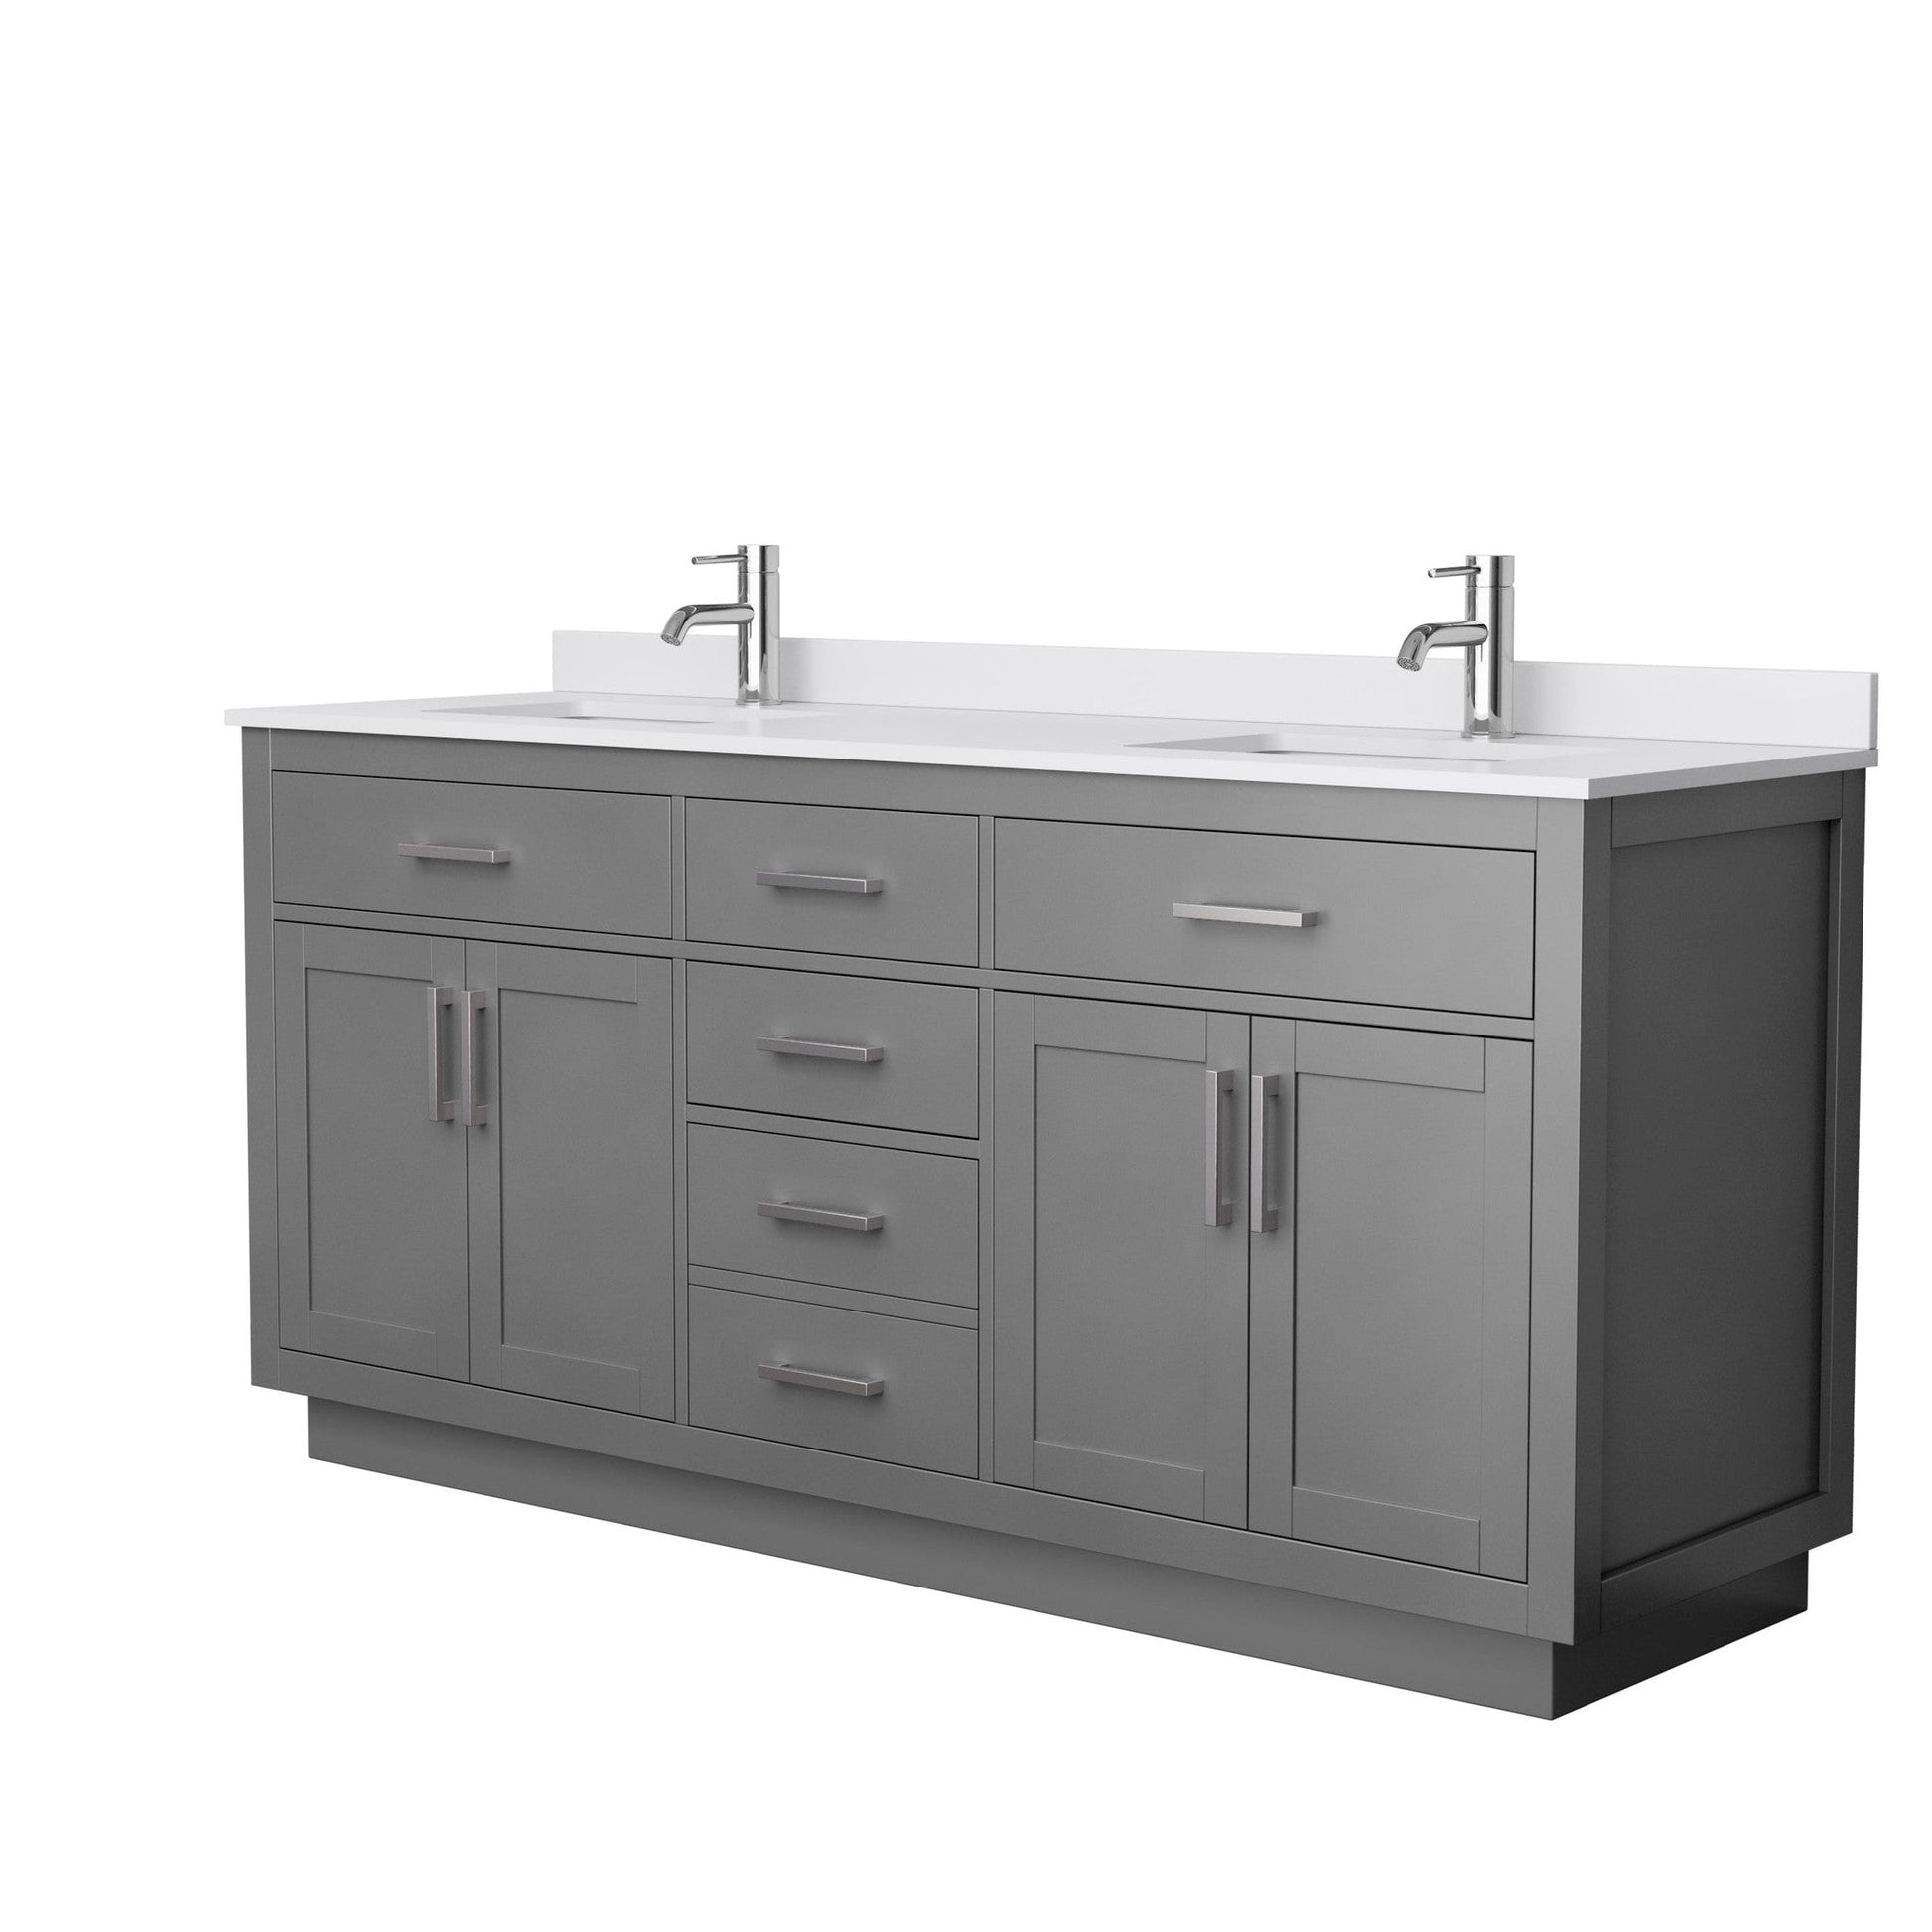 Beckett 72" Double Bathroom Vanity With Toe Kick in Dark Gray, White Cultured Marble Countertop, Undermount Square Sinks, Brushed Nickel Trim